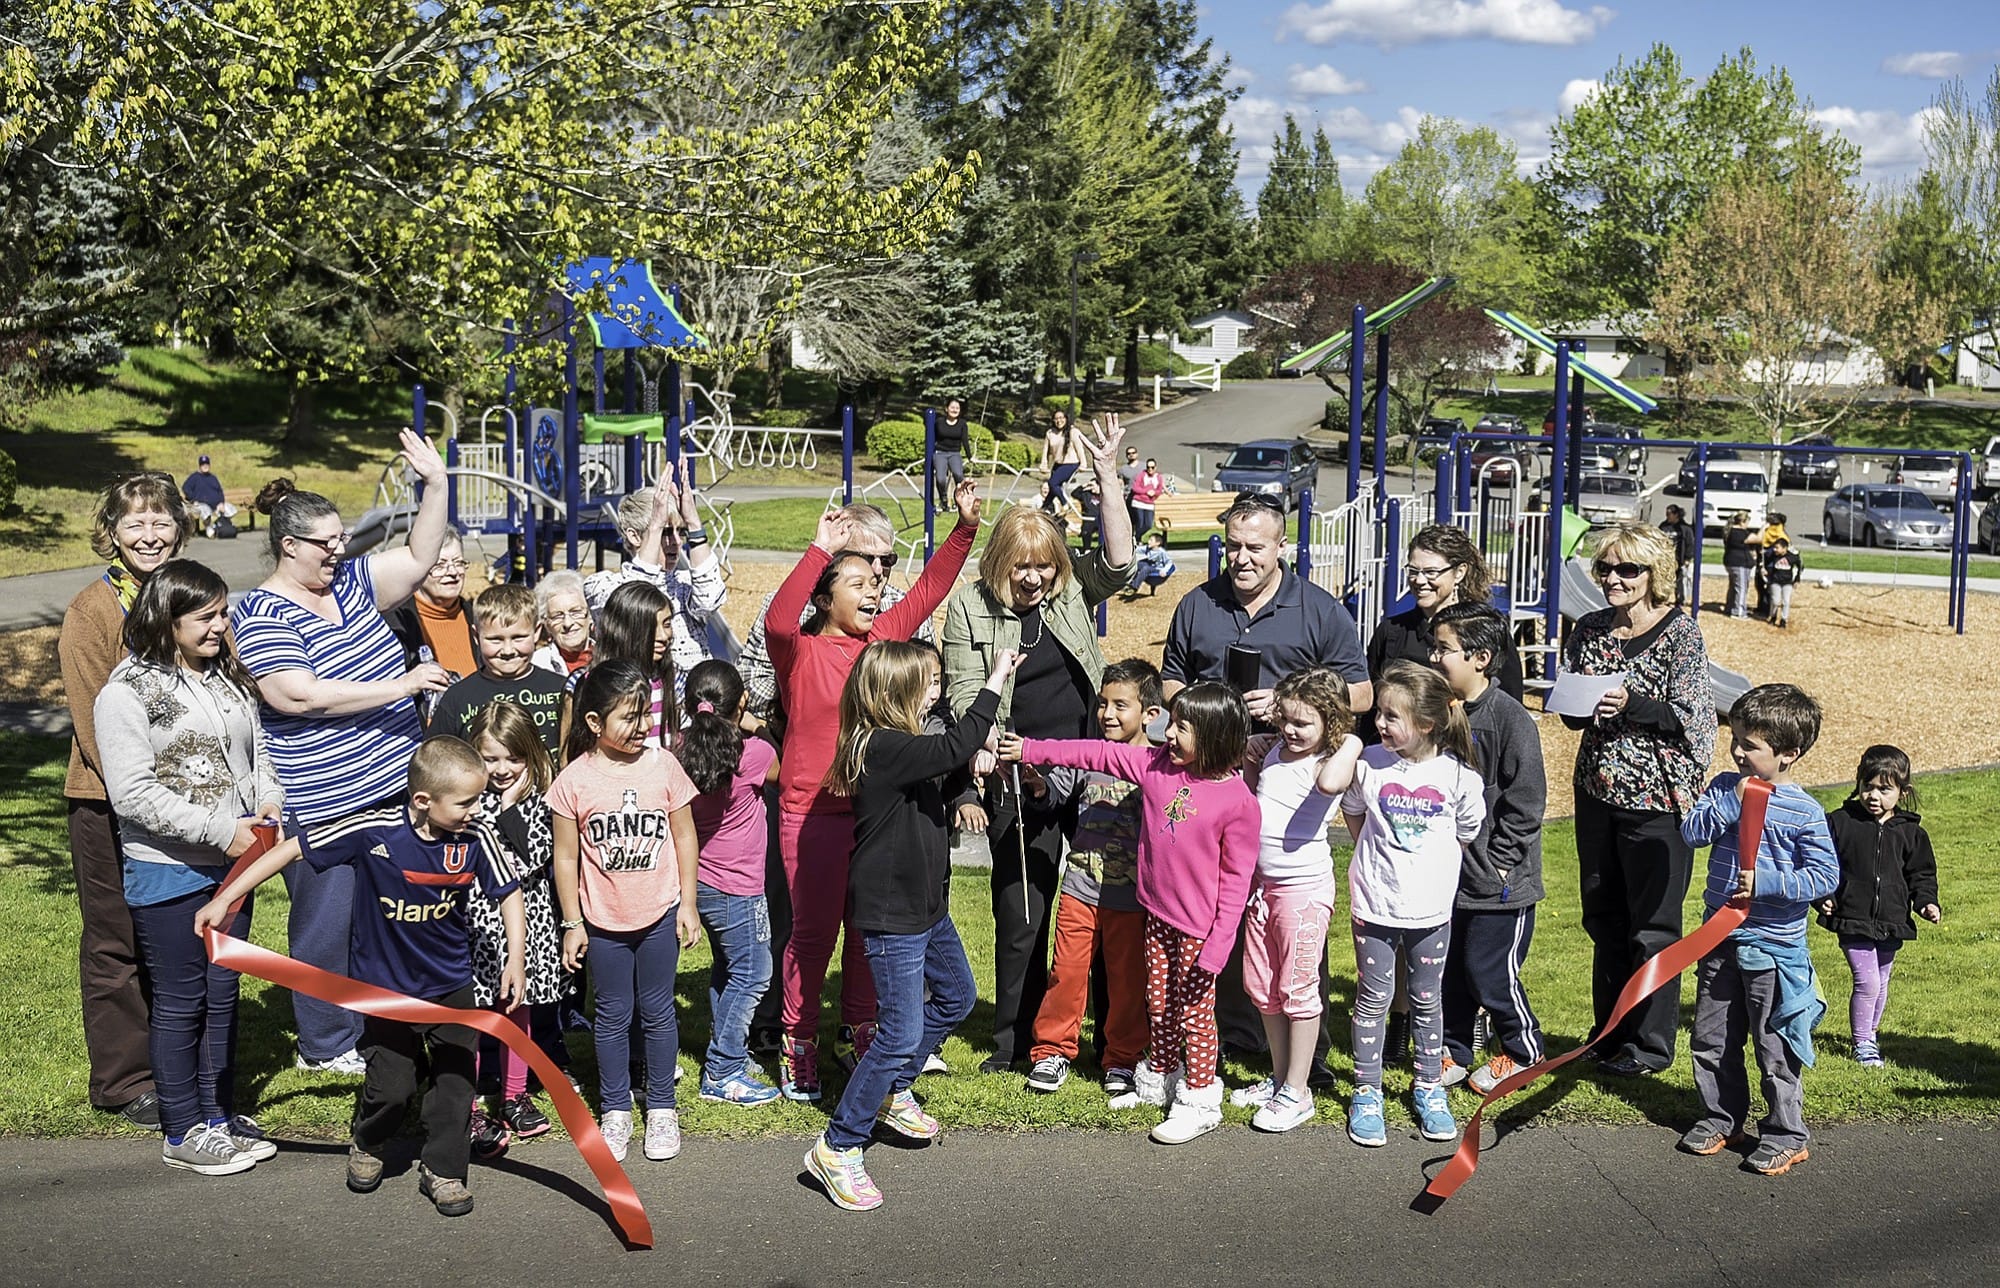 Meadow Home: A ribbon-cutting ceremony was held March 15 to re-open the Meadow Home Park with a lot of new features for kids to play.